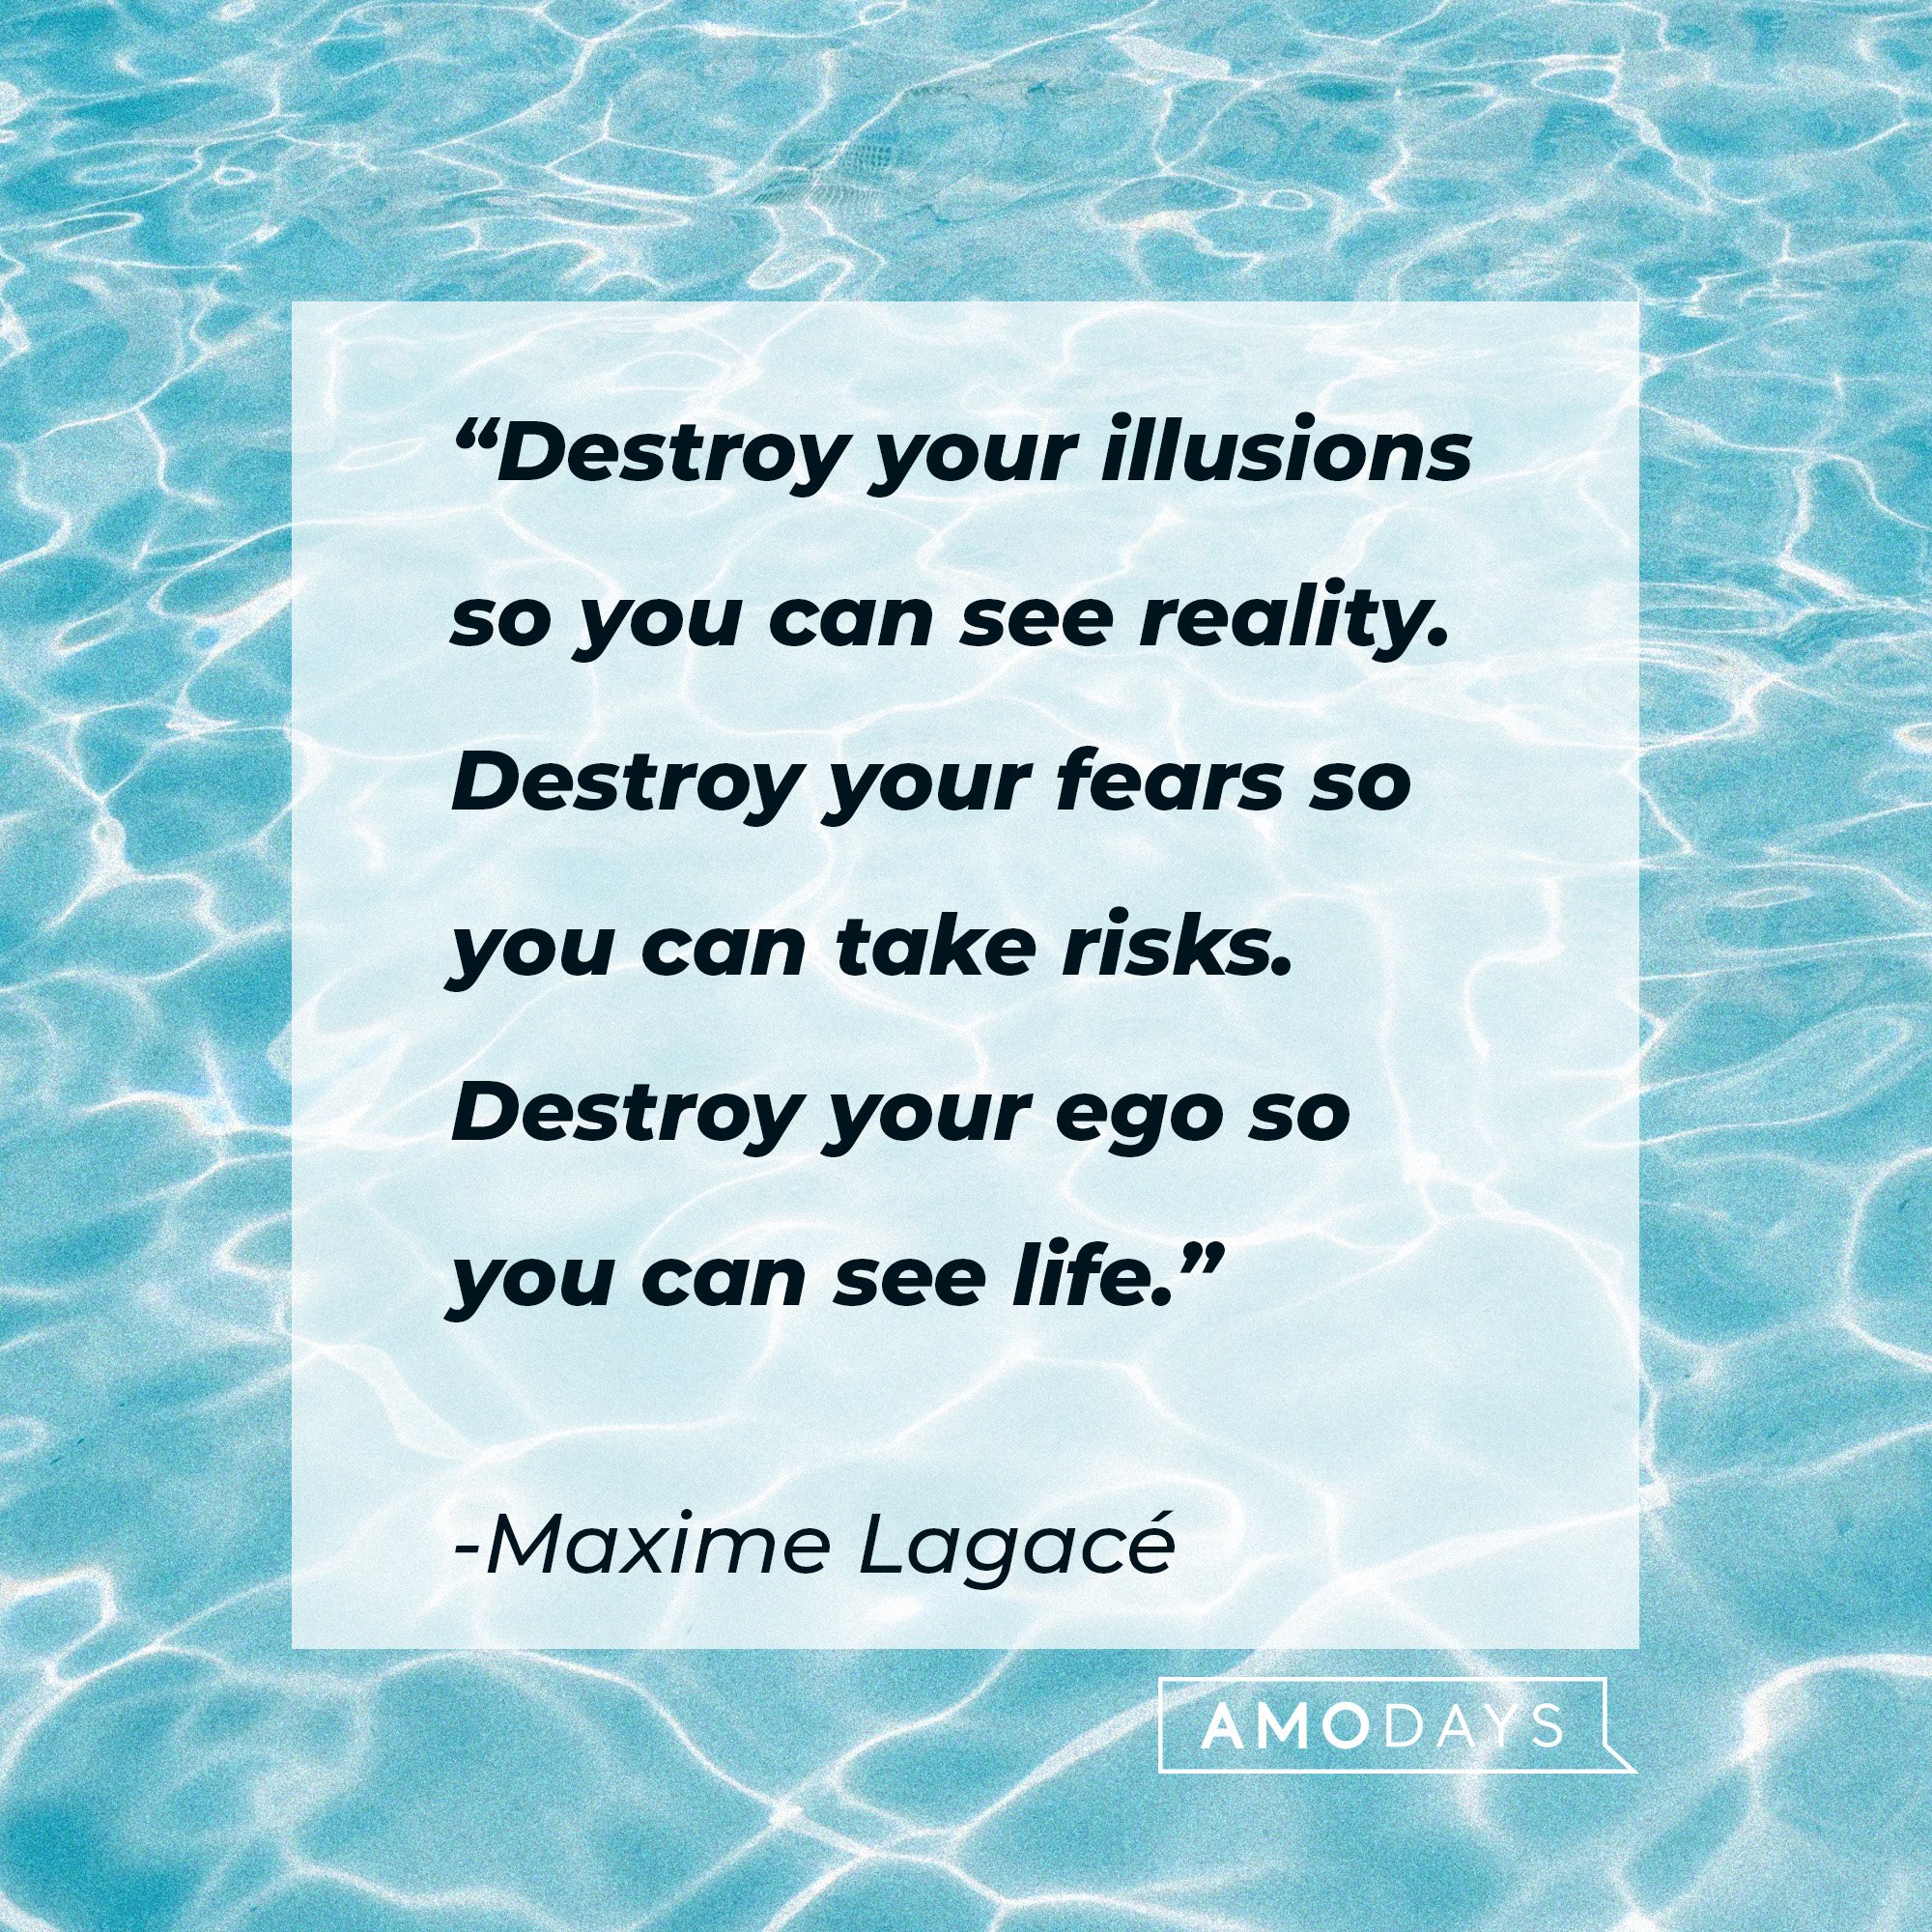 Maxime Lagacé's quote: “Destroy your illusions so you can see reality. Destroy your fears so you can take risks. Destroy your ego so you can see life.” | Image: AmoDays